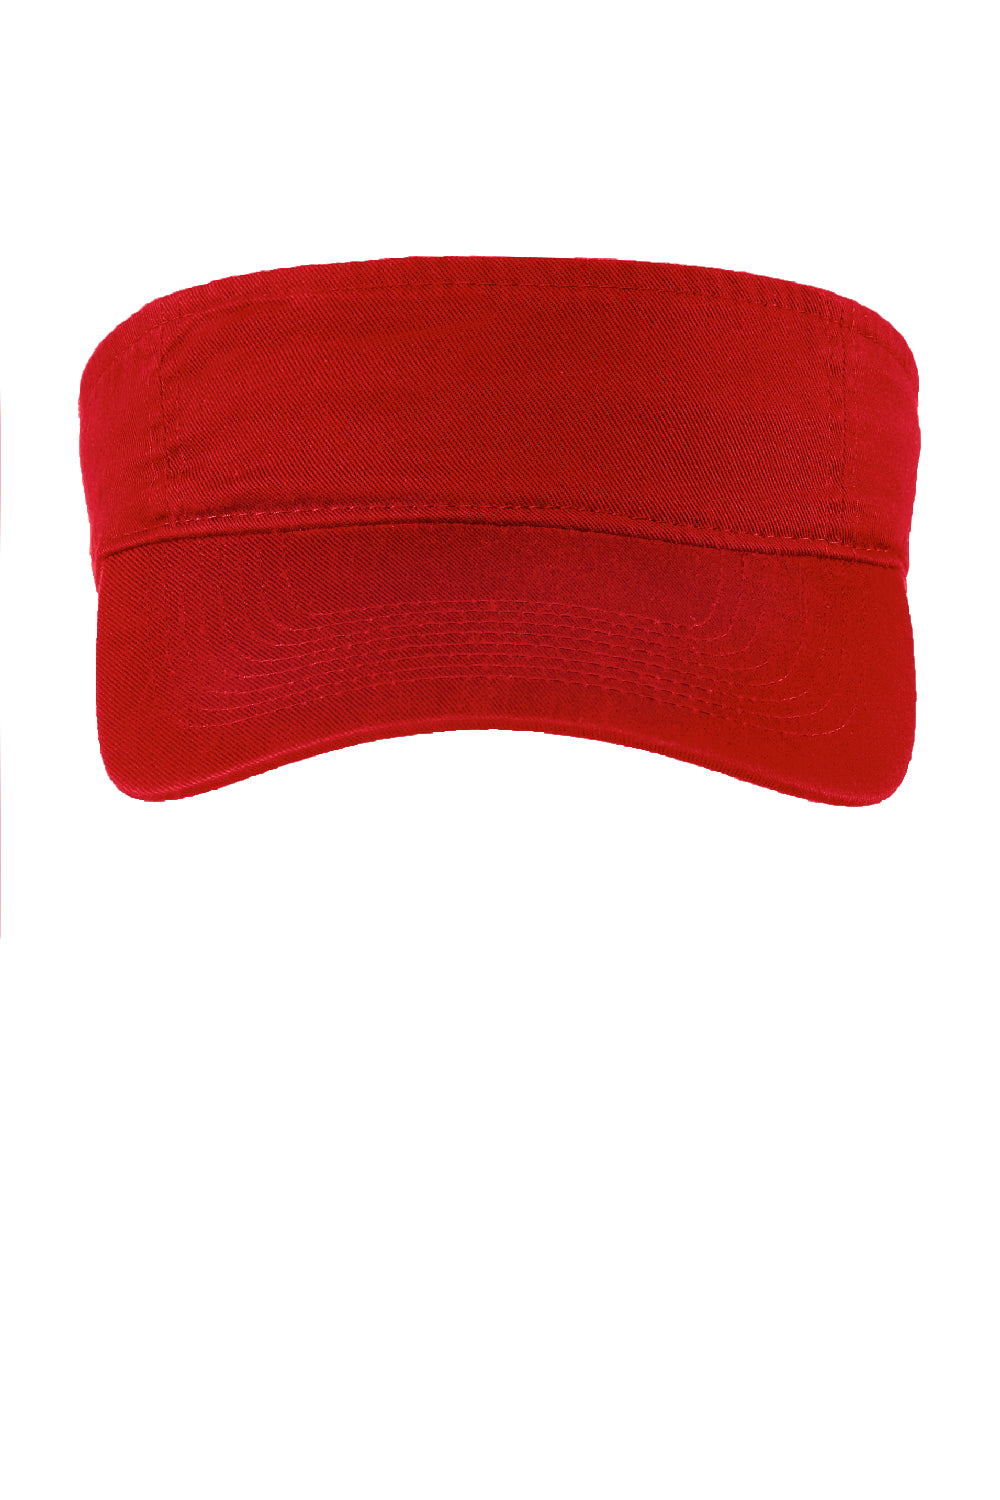 Port & Company CP45 Fashion Visor Red Front